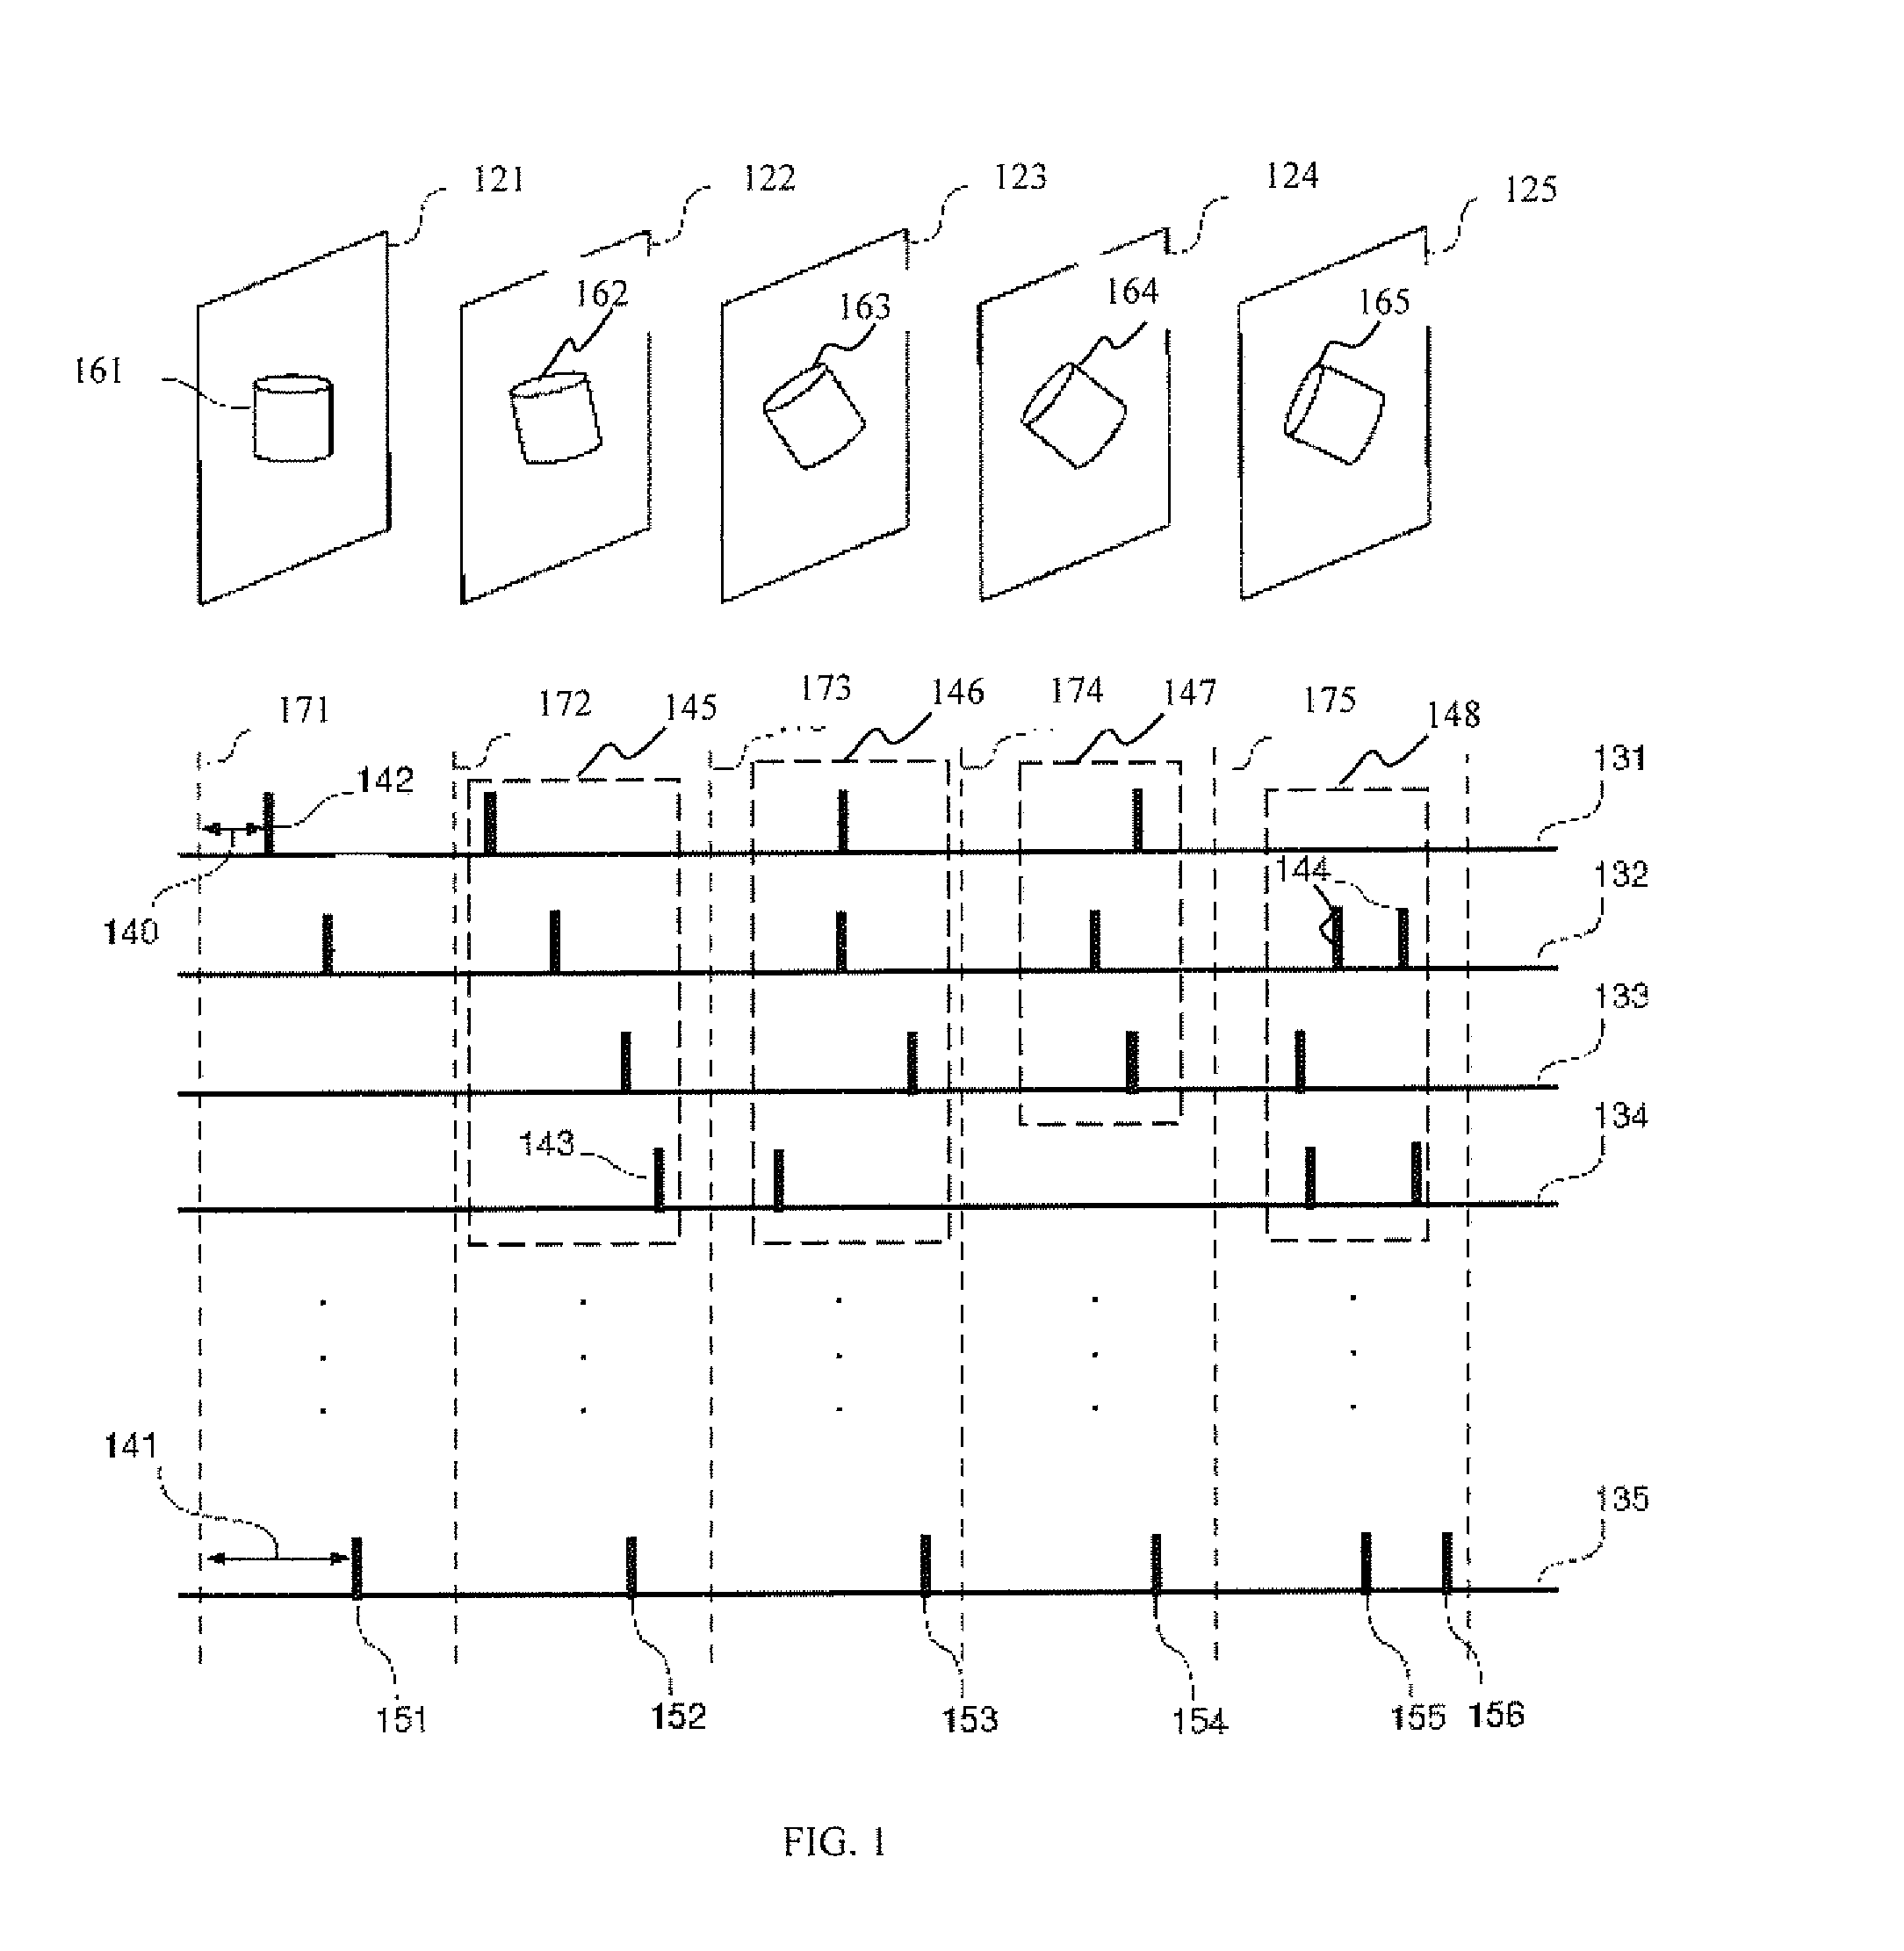 Spiking network apparatus and method with bimodal spike-timing dependent plasticity